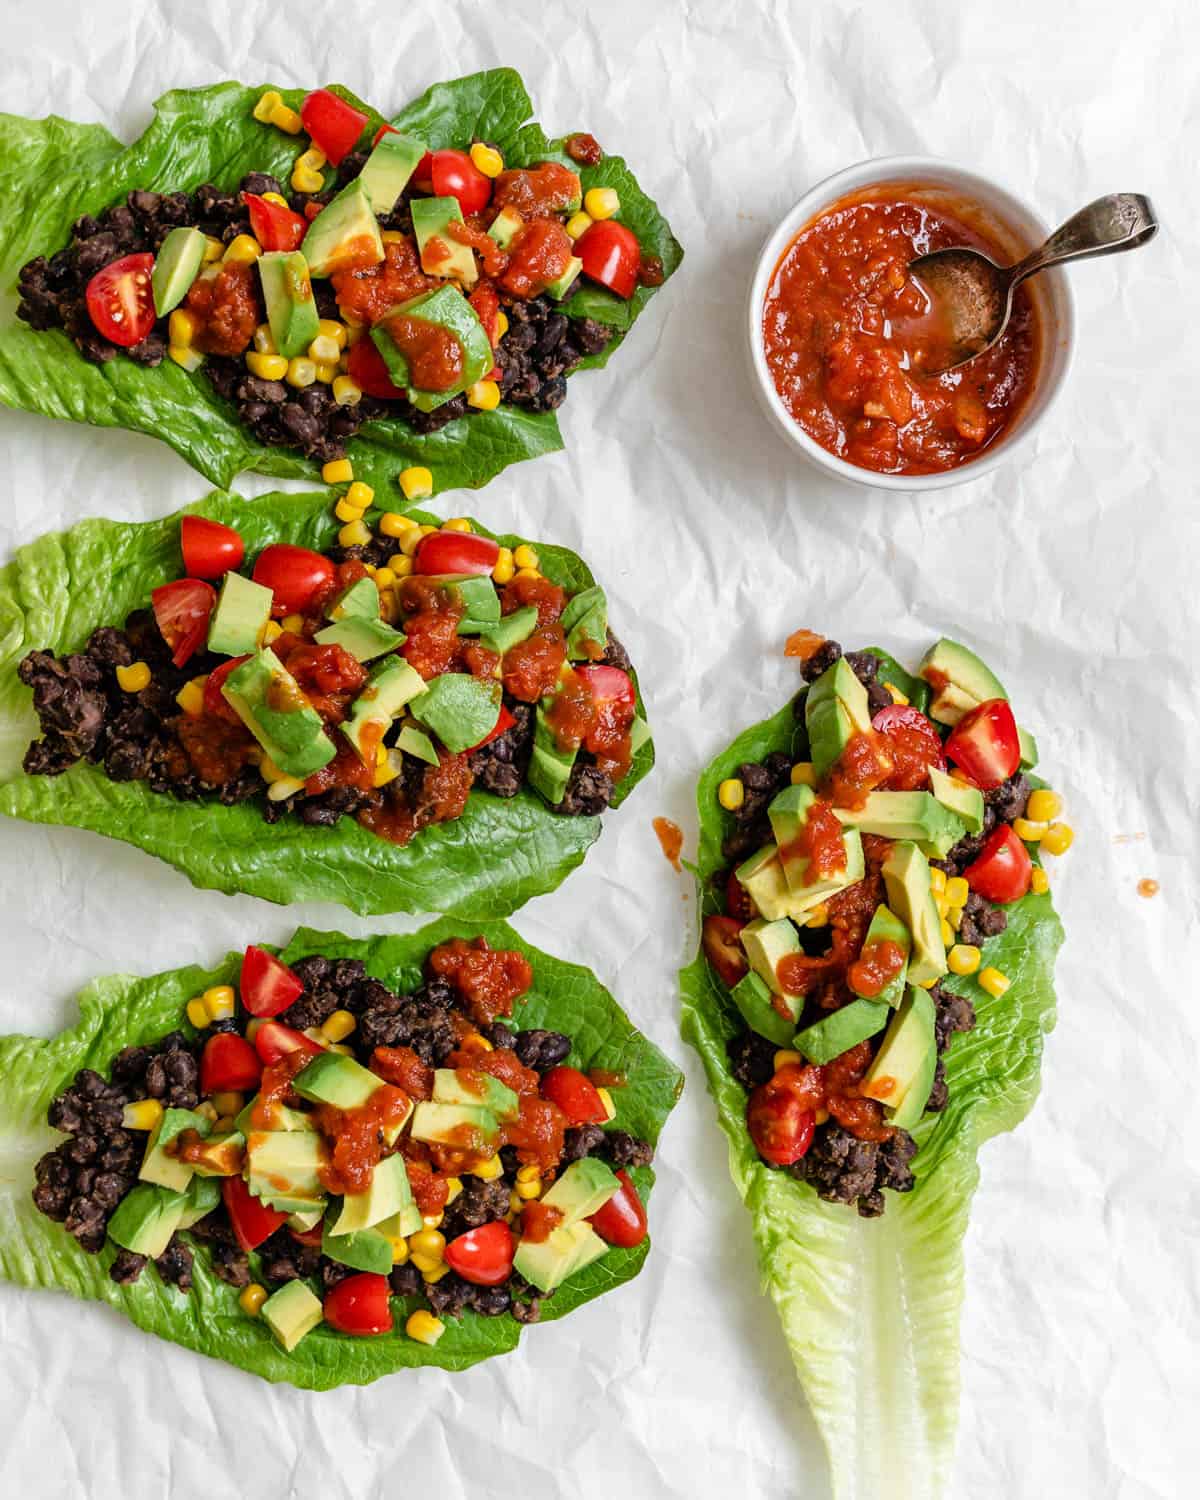 completed Vegan Black Bean Lettuce Wraps against a white surface